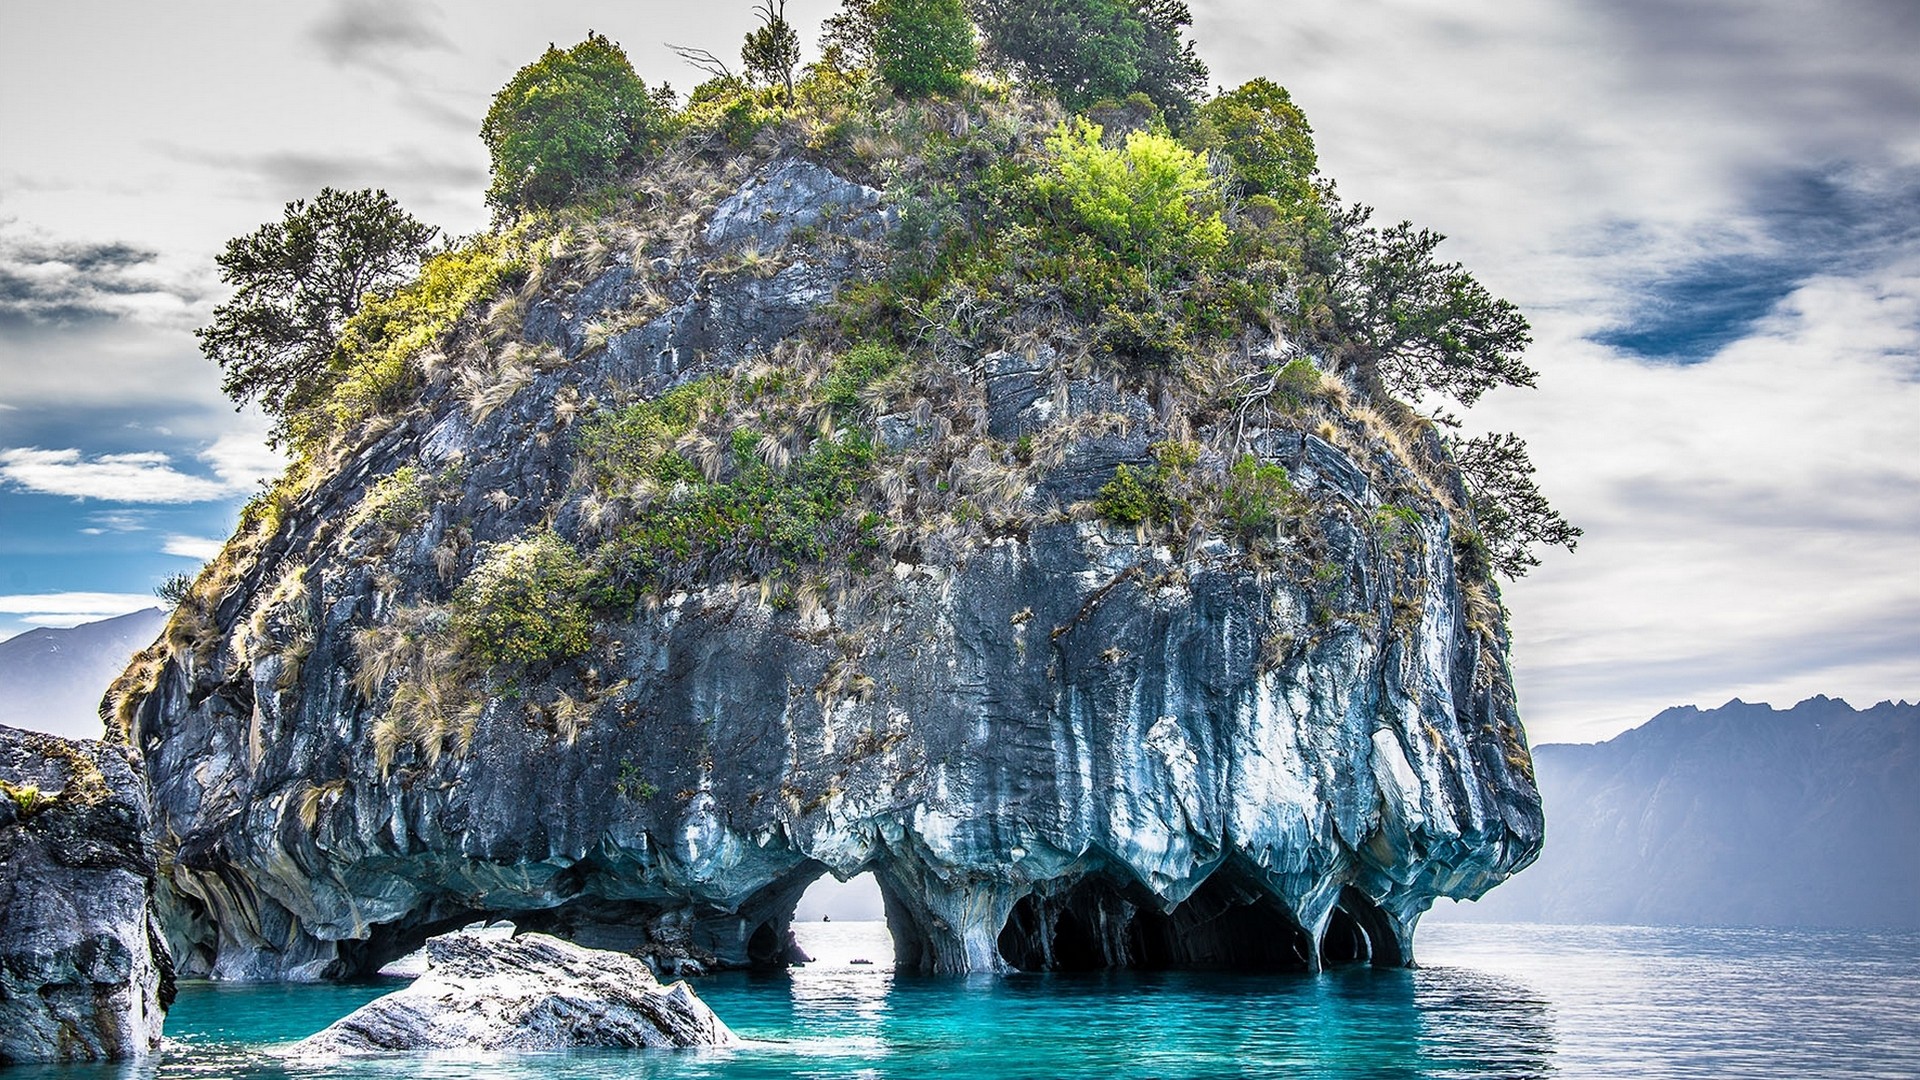 Nature Landscape Marble Cathedral Rock Lake Island Trees Shrubs Patagonia Chile Erosion Cave Turquoi 1920x1080